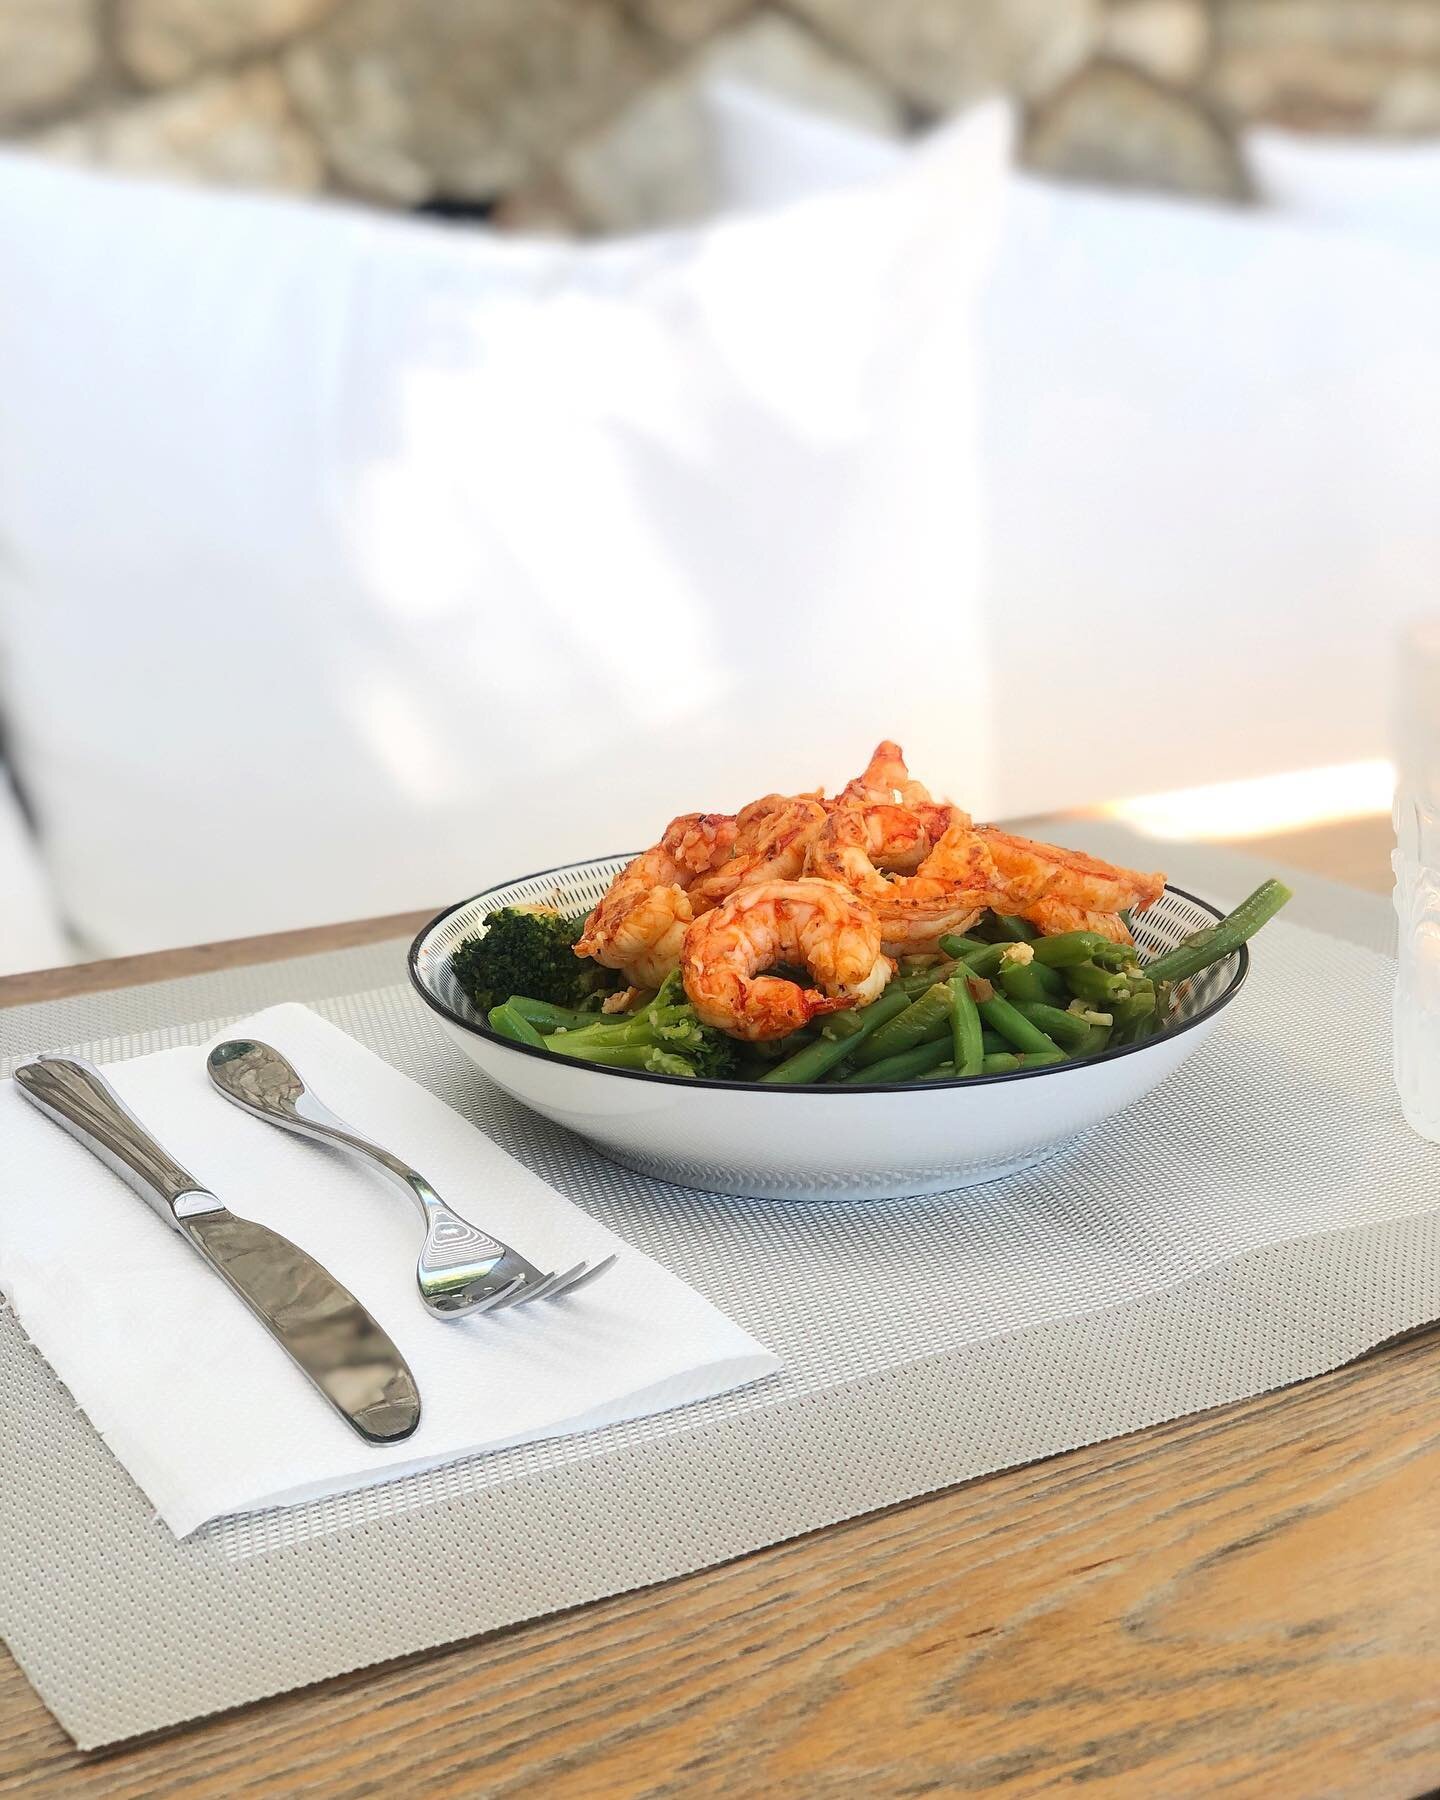 ✅ Private chef ✅ Incredible view ✅ Greek island 

Lemon prawns with a broccoli and green bean salad at villa Helena 

#prawns #lunch #privatechef #privatecook #greek #greekvilla #greece #luxurylifestyle #luxury #luxuryhomes #luxuryrealestate #salad #